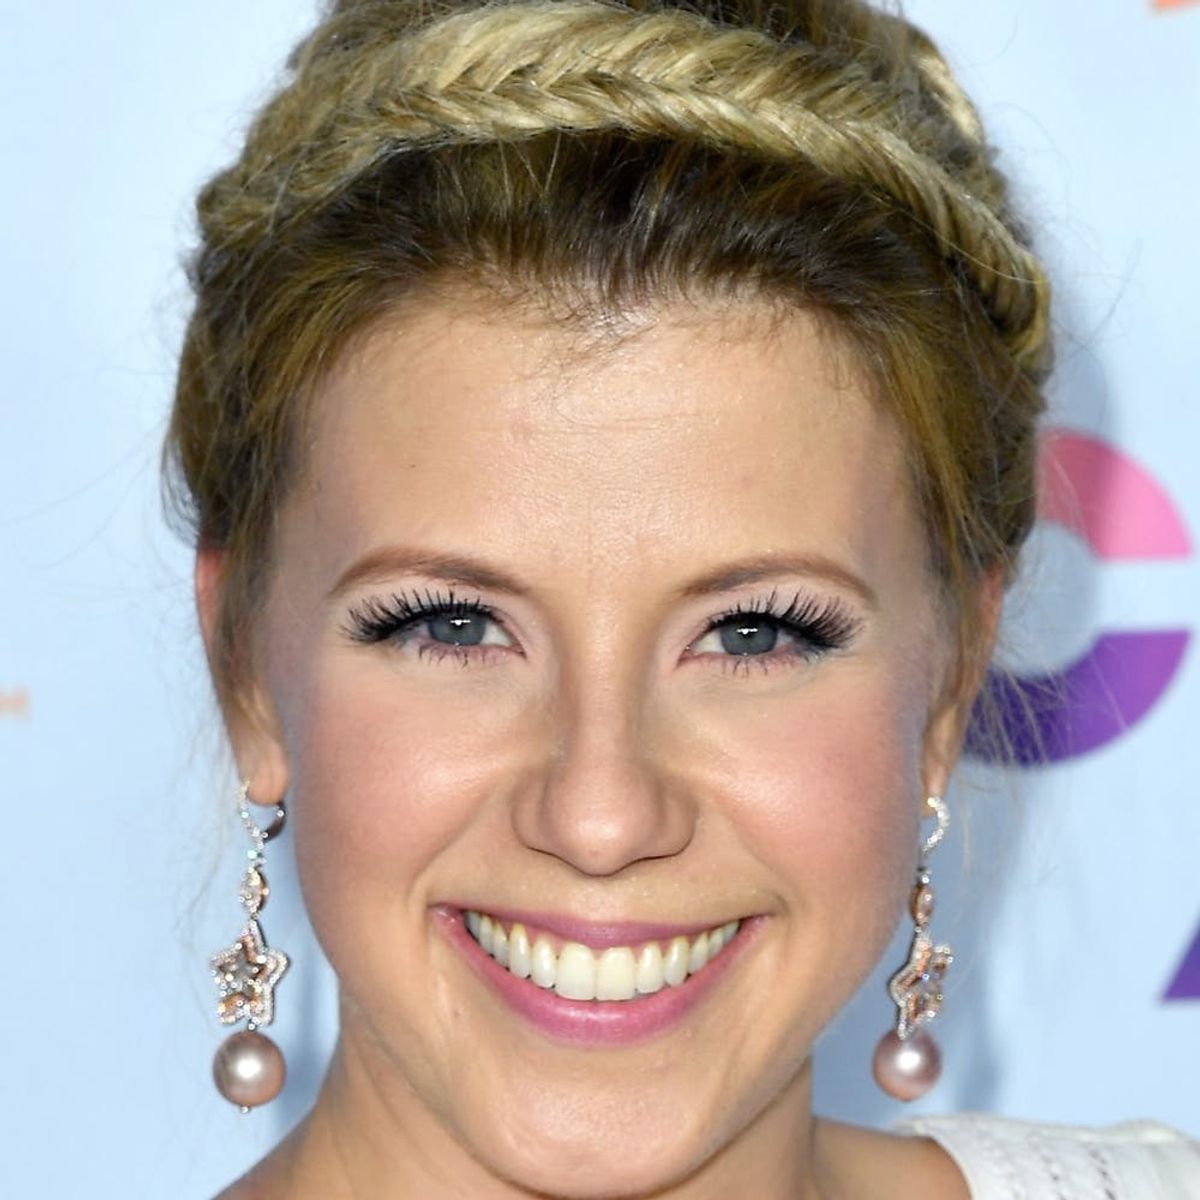 Jodie Sweetin Is Rocking a Cool New Hair Hue Stephanie Tanner Would DEFINITELY Approve Of